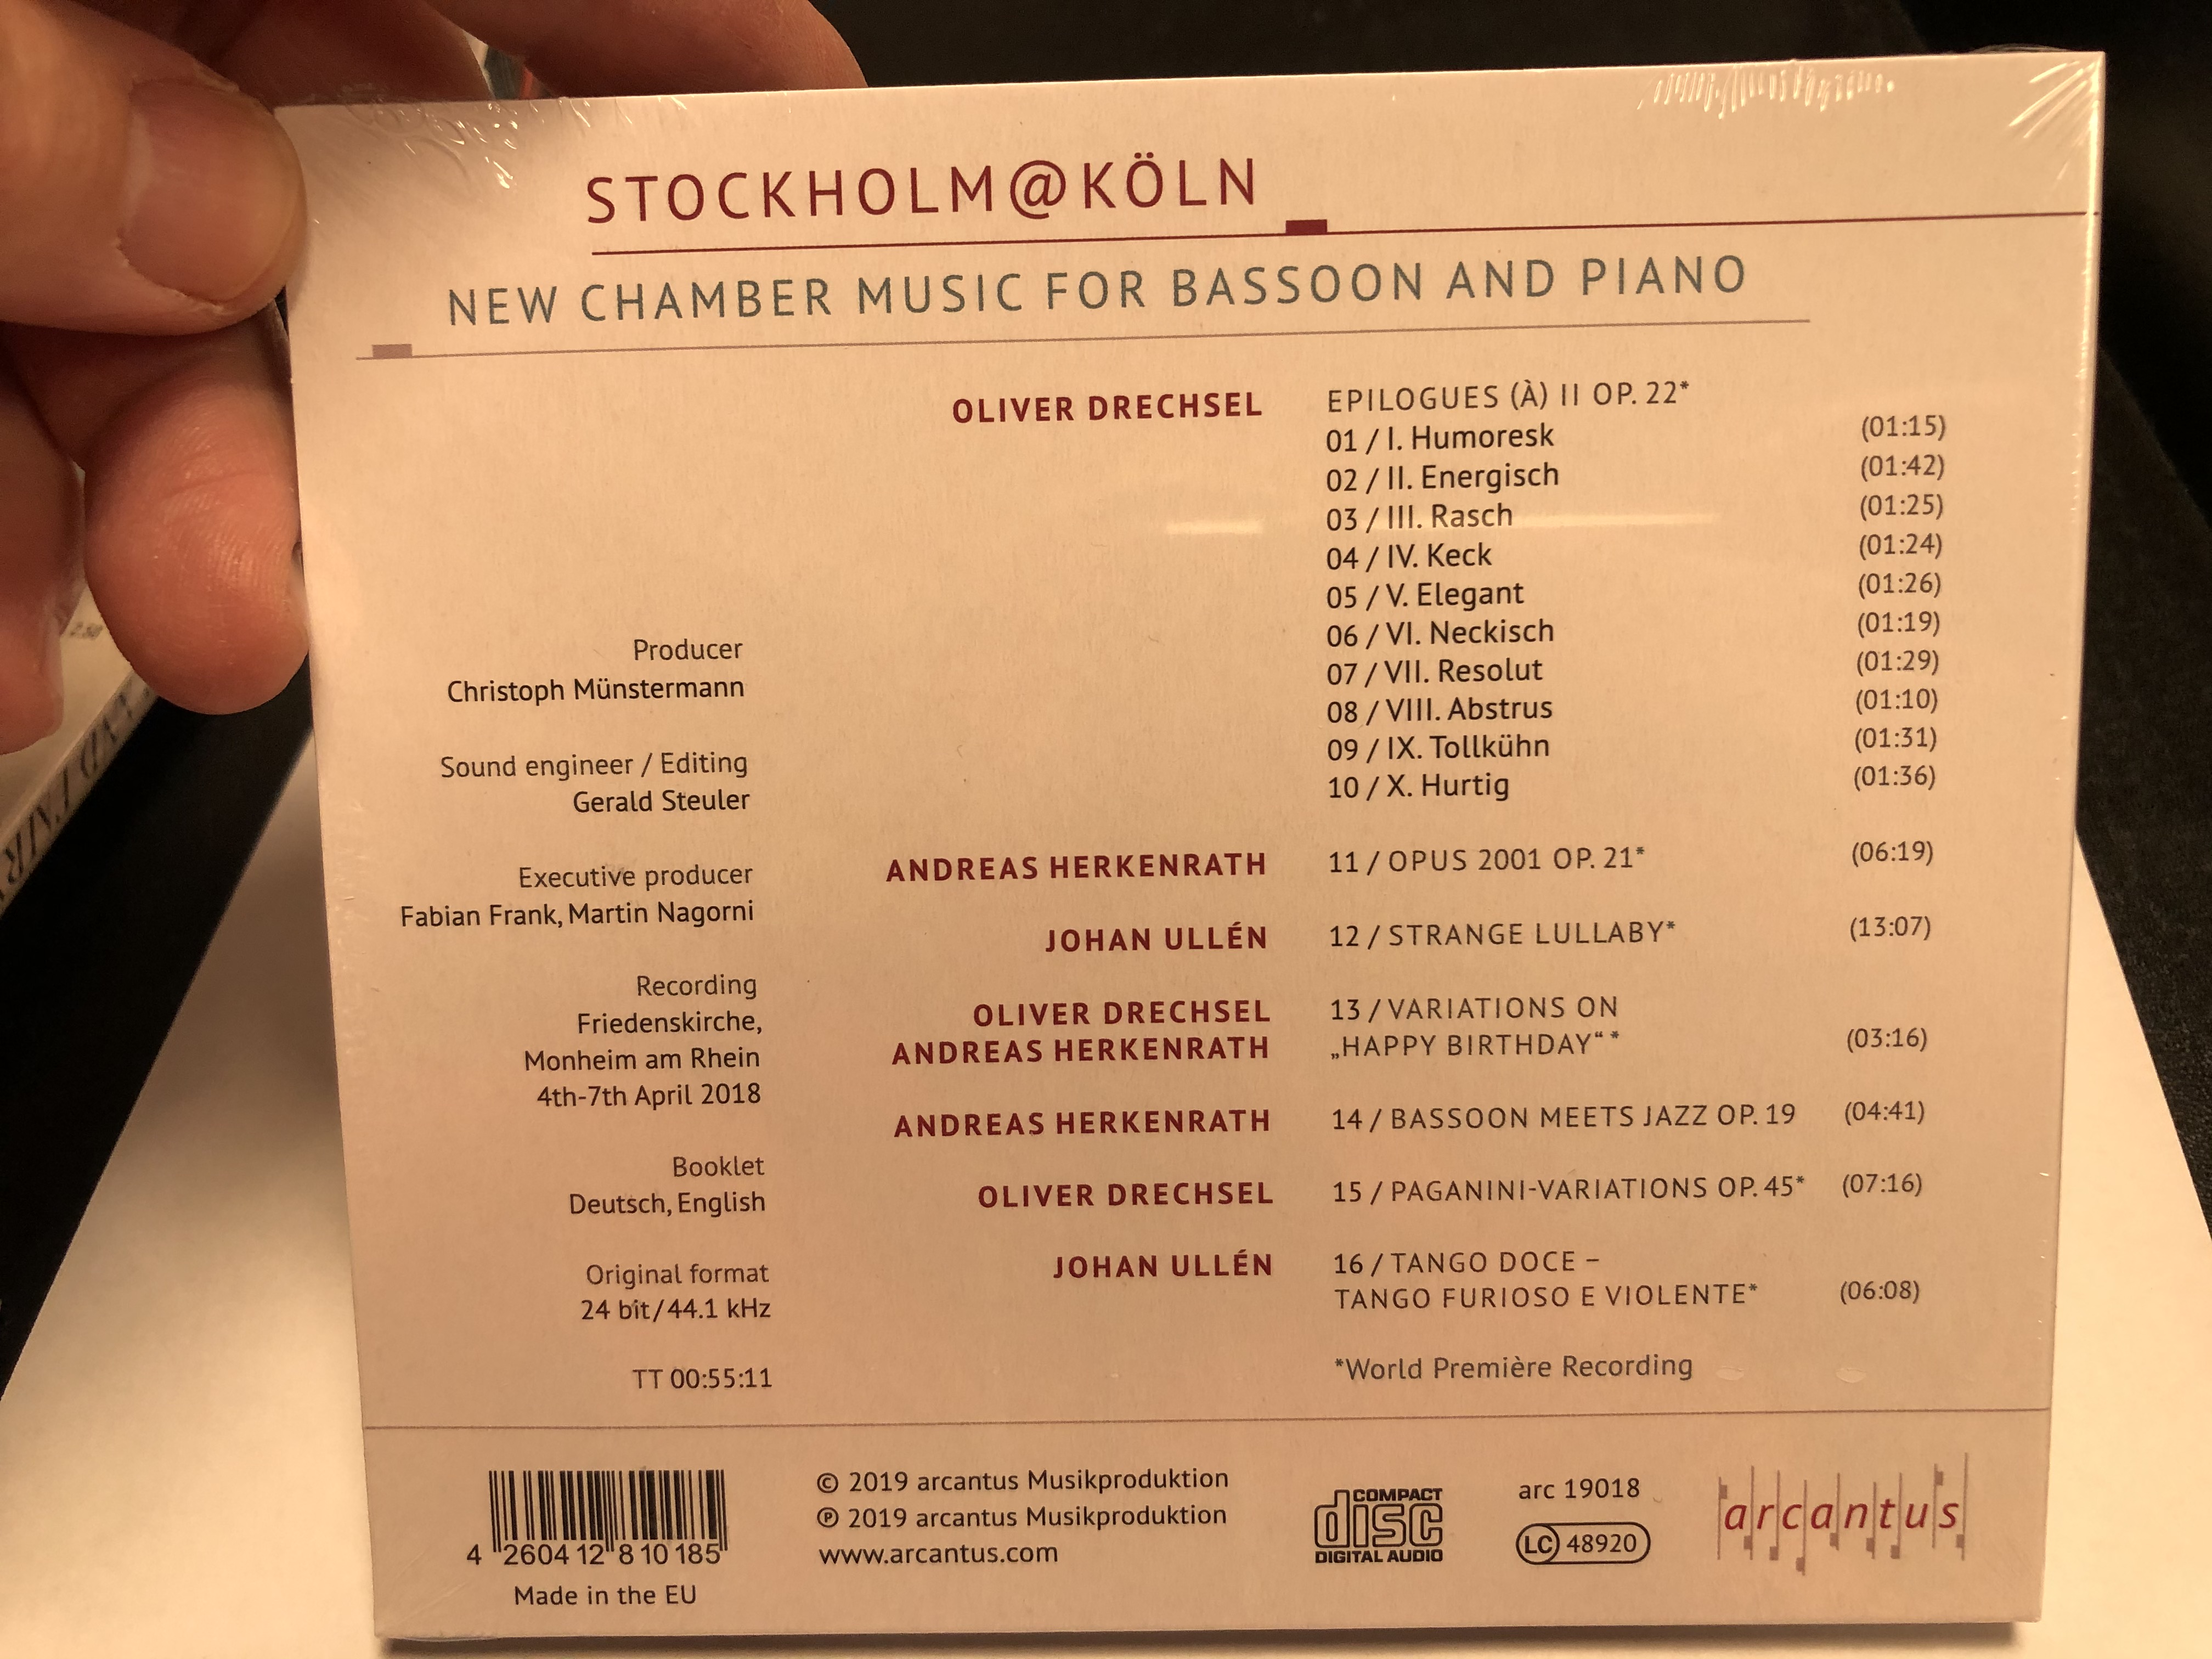 stockholm-koln-new-chamber-music-for-bassoon-and-piano-works-by-drechsel-herkenrath-ullen-berthold-grosse-bassoon-oliver-drechsel-piano-arcantus-audio-cd-2019-arc-19018-2-.jpg